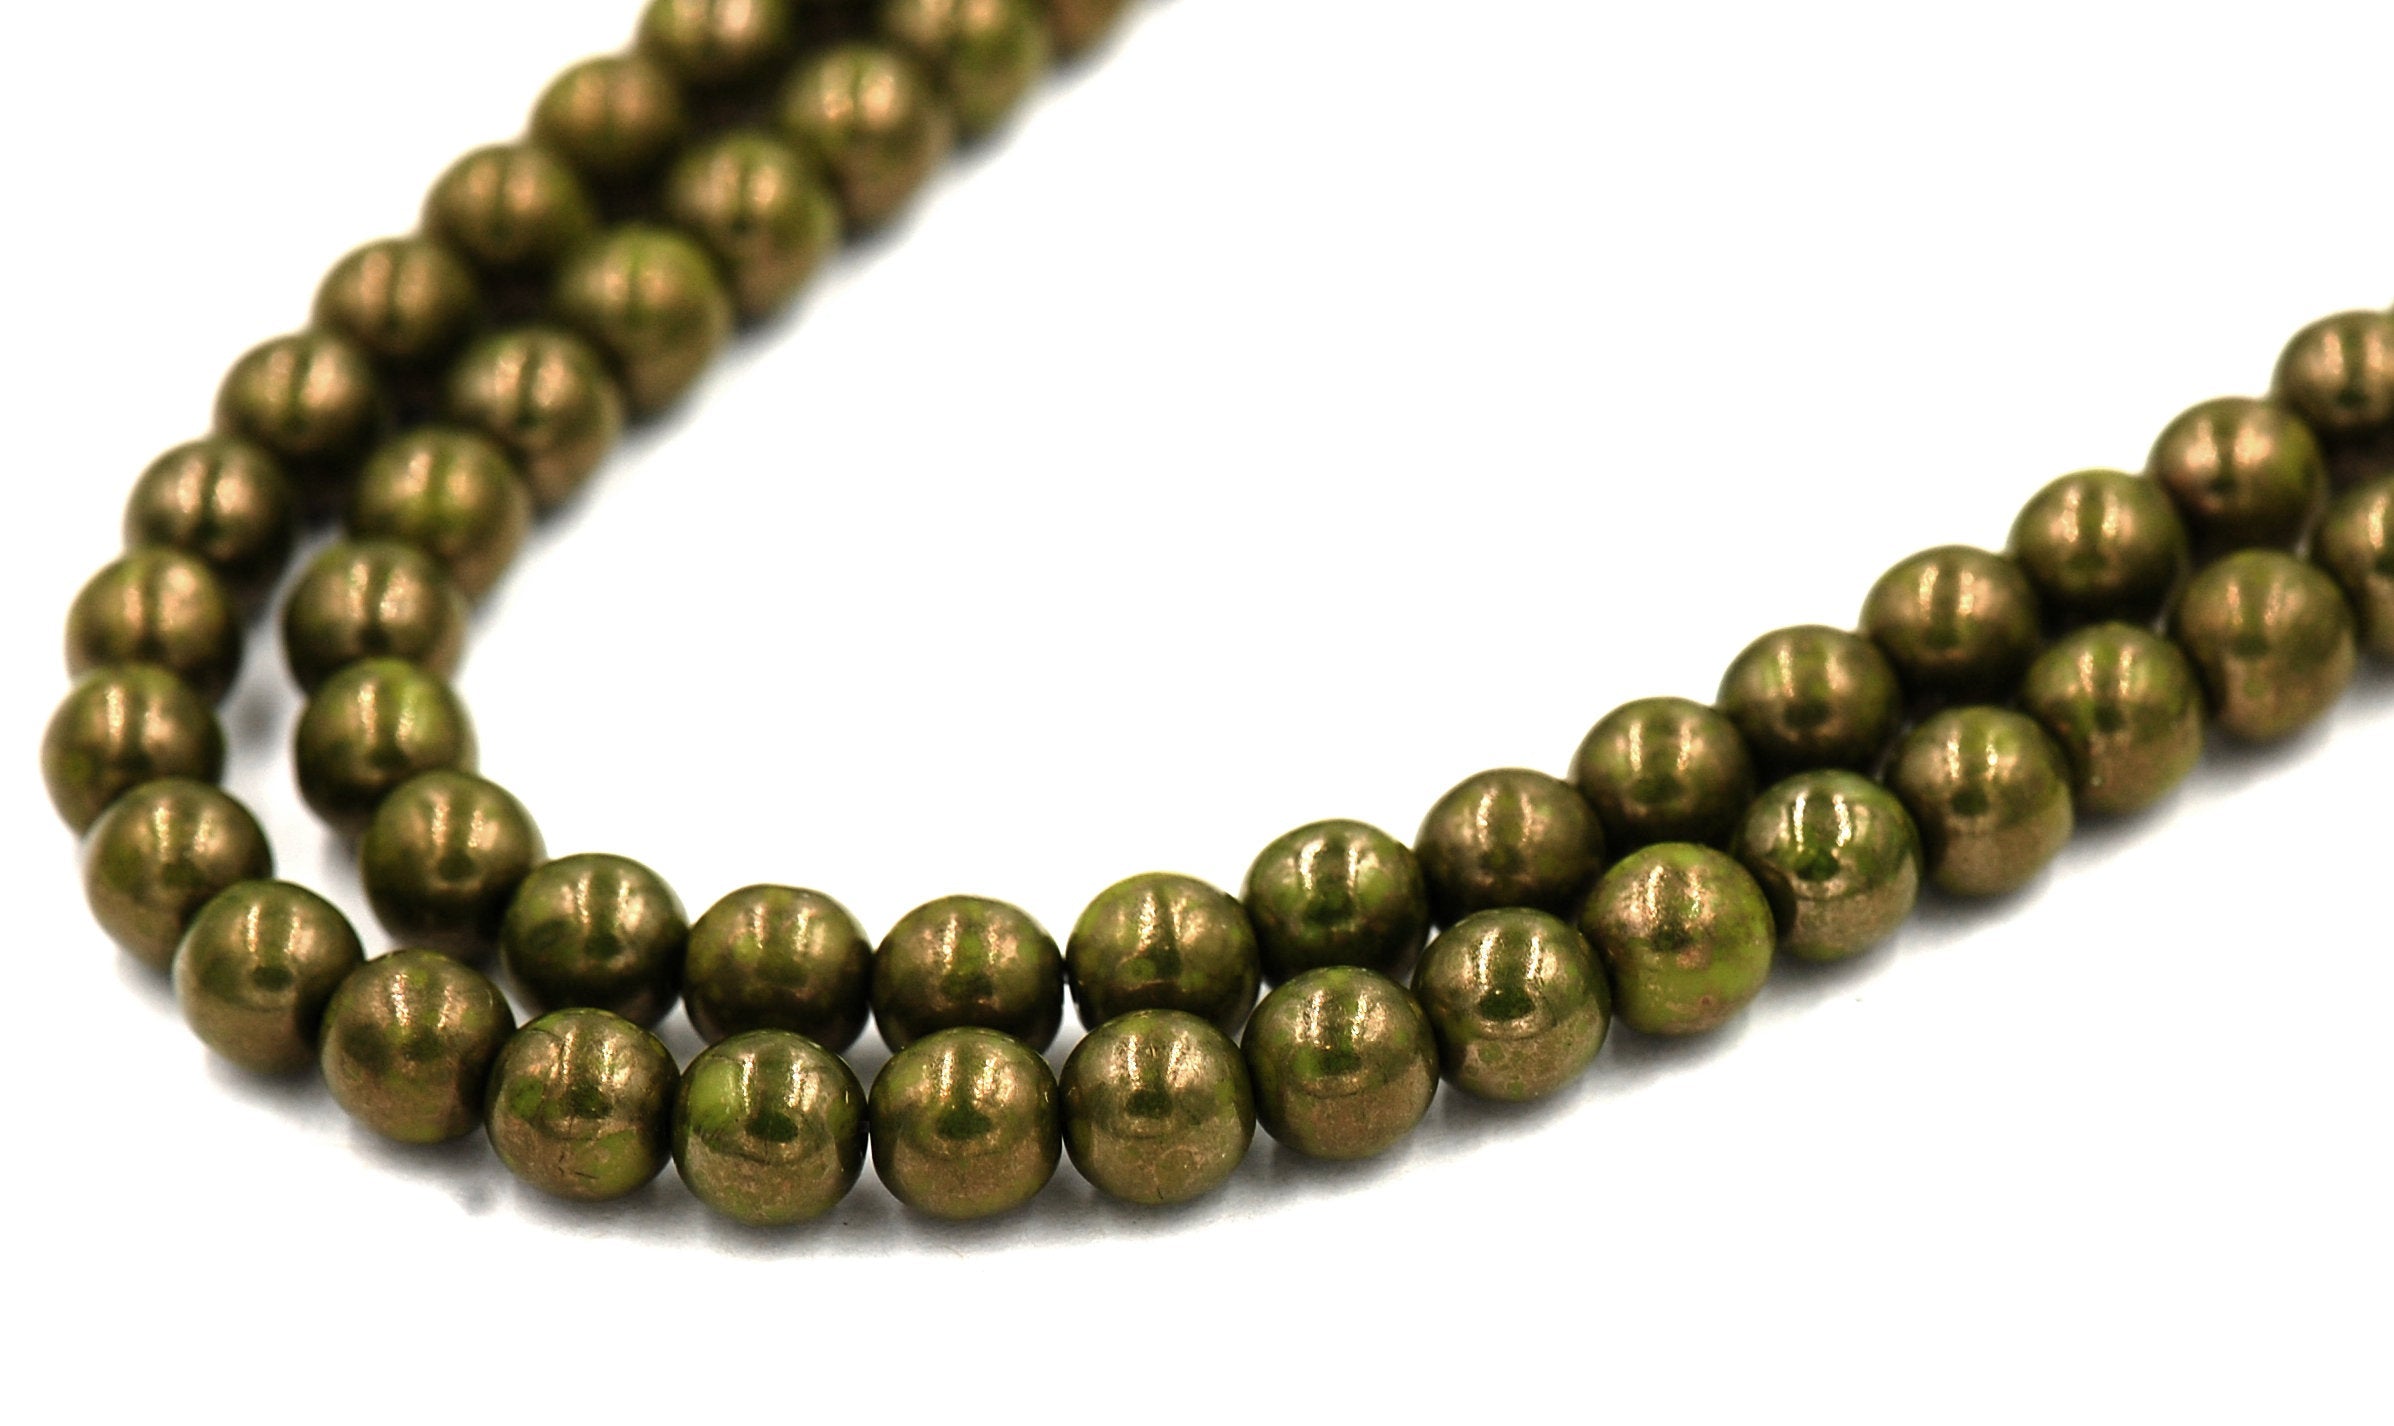 6mm Czech Glass Round Opaque Olive Moon Dust Green Luster  -50